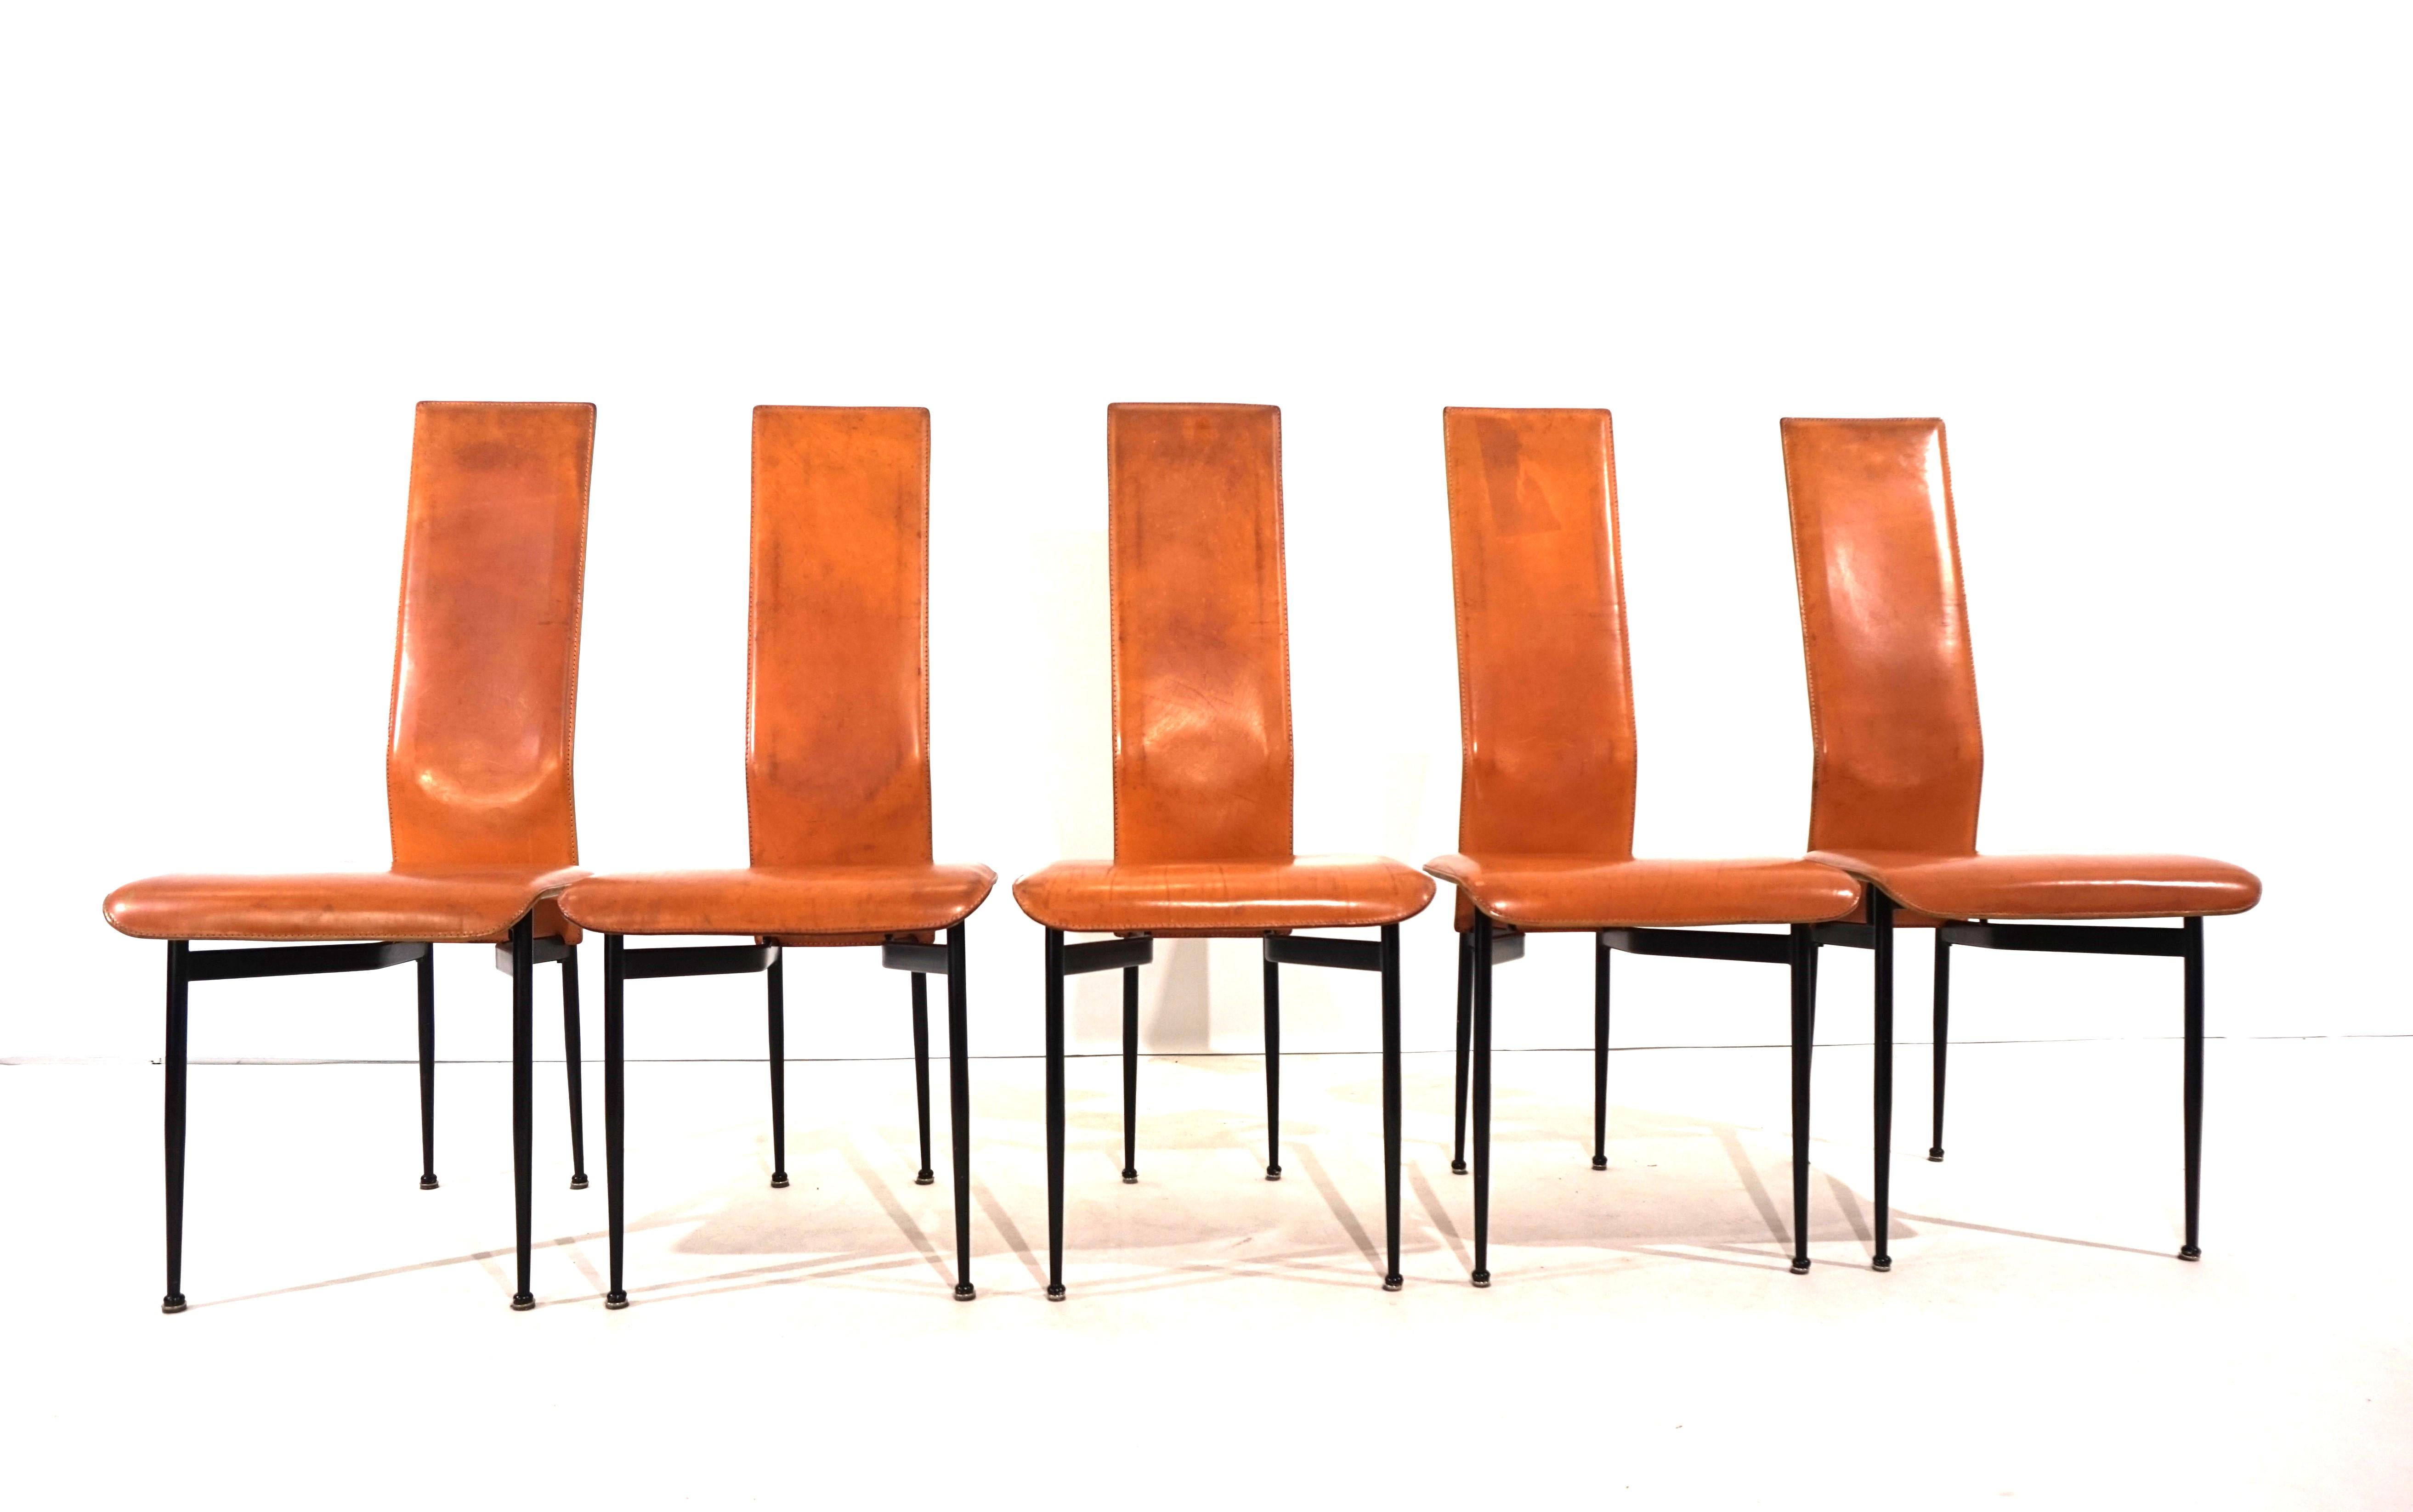 This group of 5 Fasem S44 dining chairs comes in a whisky-colored leather with a distinctive patina on all chairs, which is what makes these chairs so charming, especially in this color. The leather and the black painted metal frame otherwise only